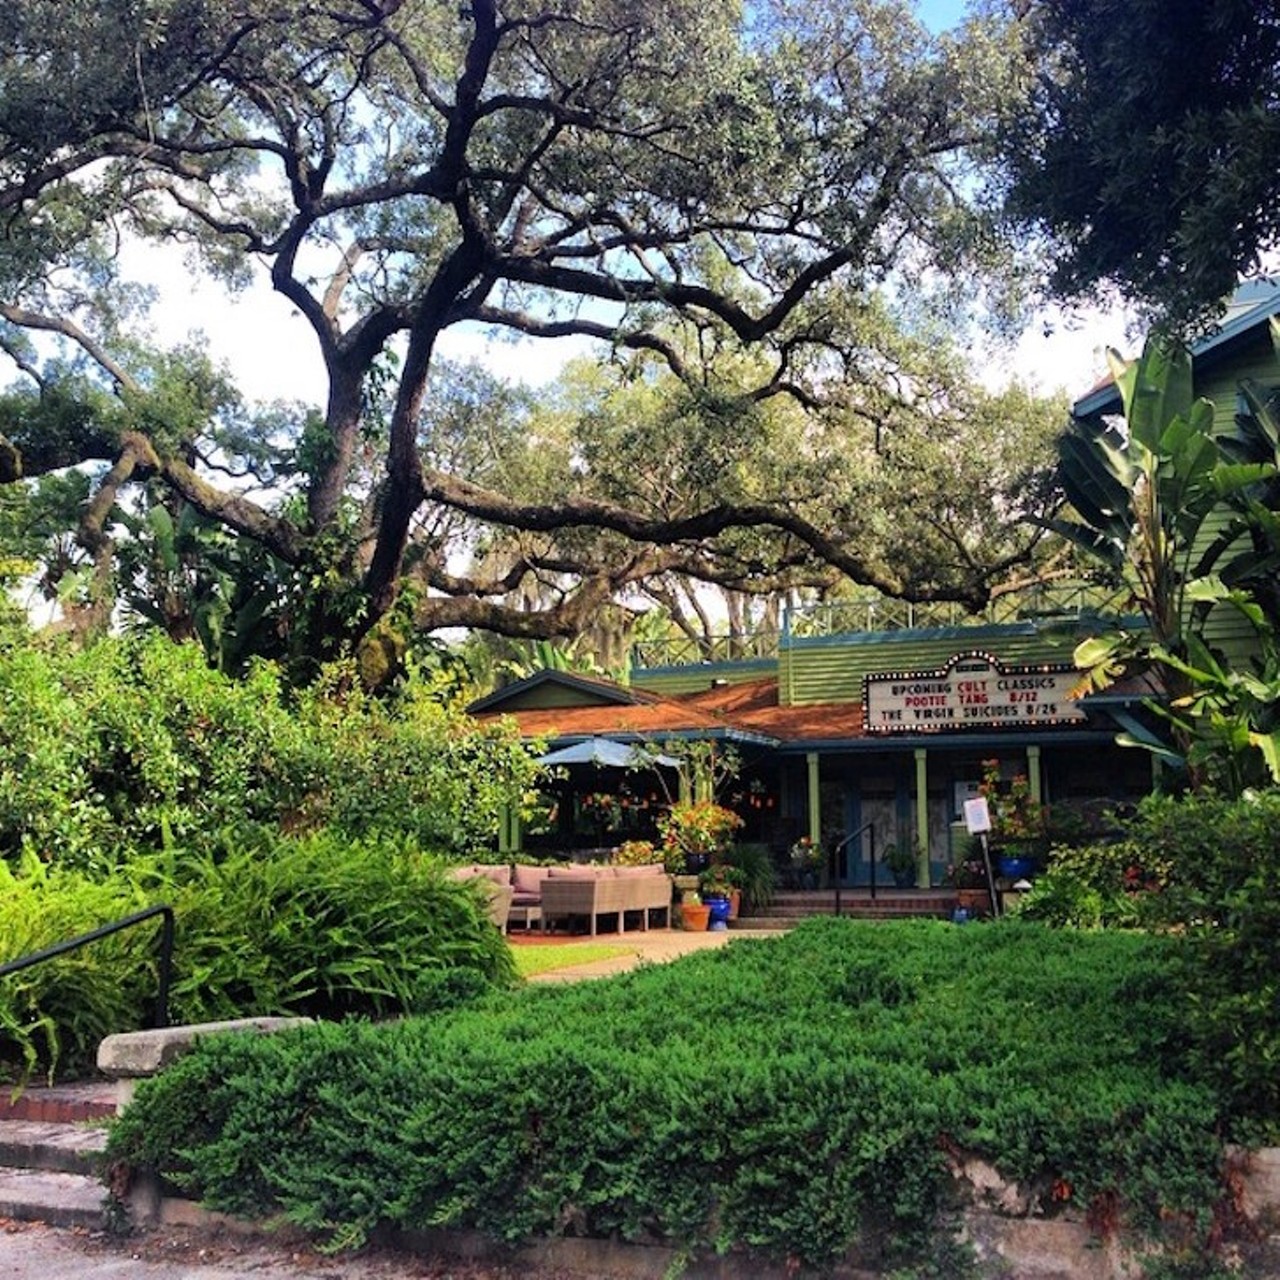 Enzian Theater
Enzian's Eden Bar knows how to sling a good cocktail. The lawn's usually reserved for free flicks, but certainly they'll trim the grass when the bride walks down the aisle.
1300 S. Orlando Ave., Maitland | 407-629-0054
Photo via enziantheater/Instagram